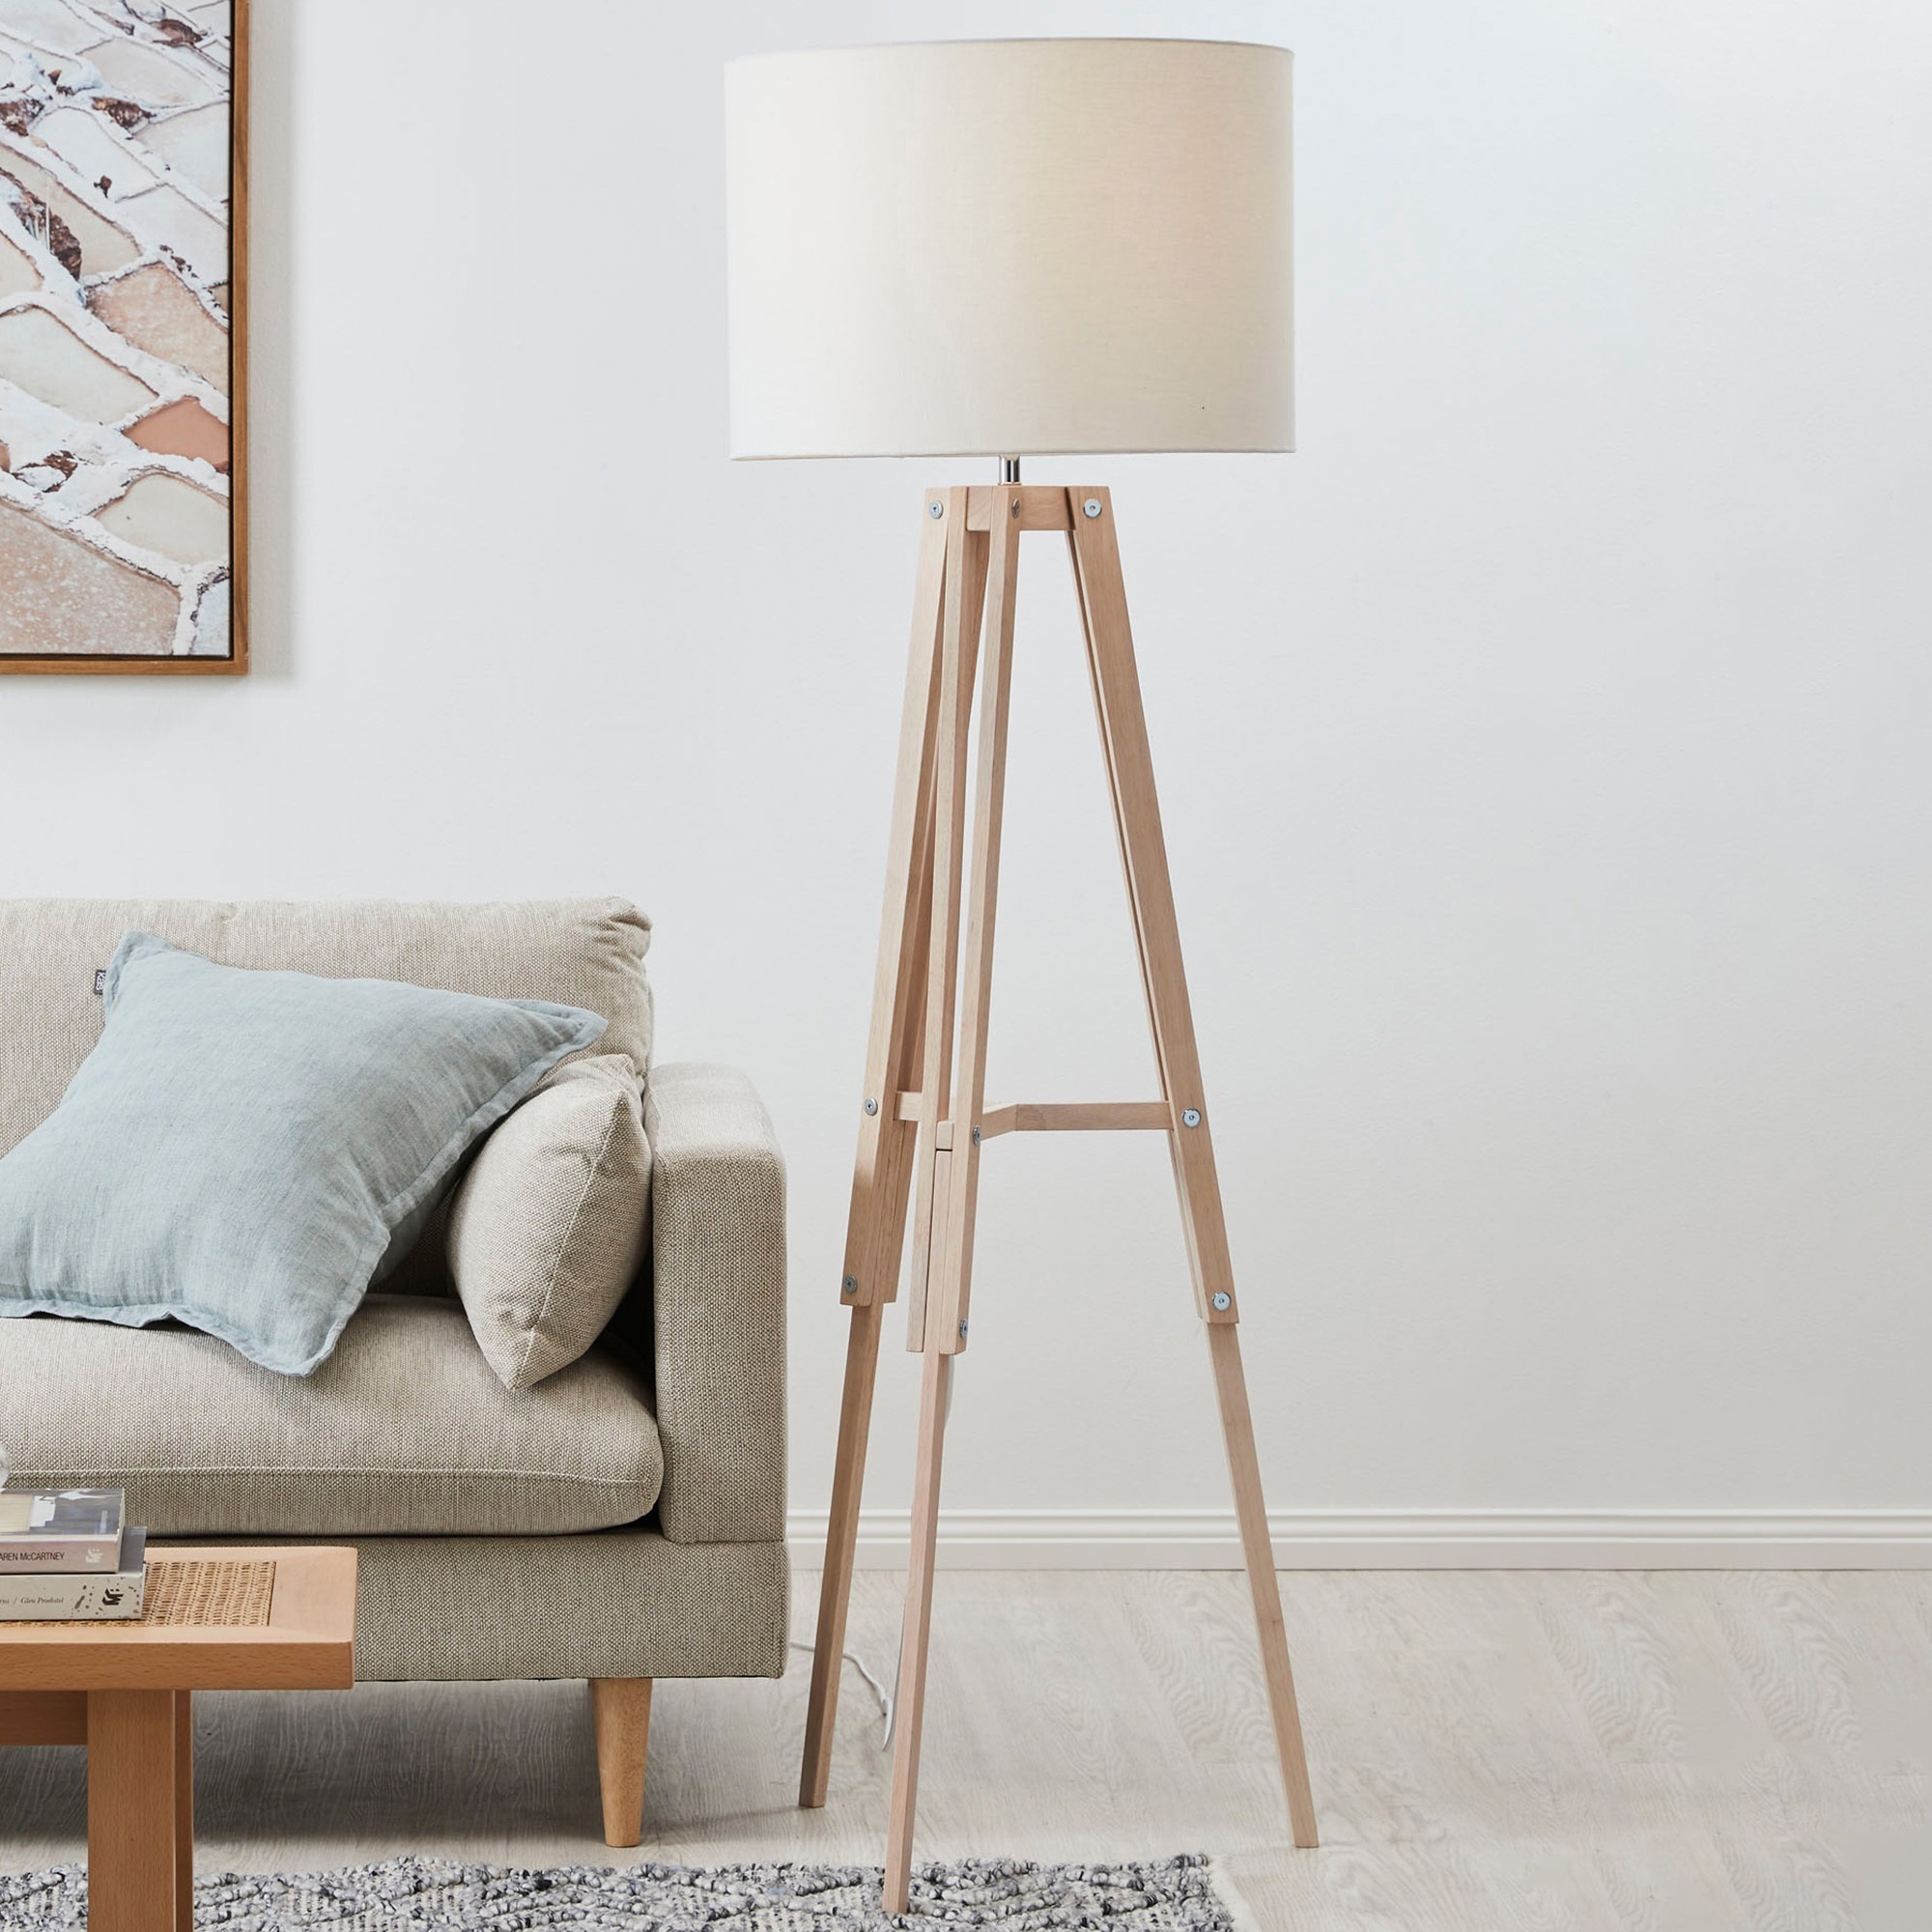 Temple Webster Benson Wooden Tripod, Small Wooden Tripod Table Lamp